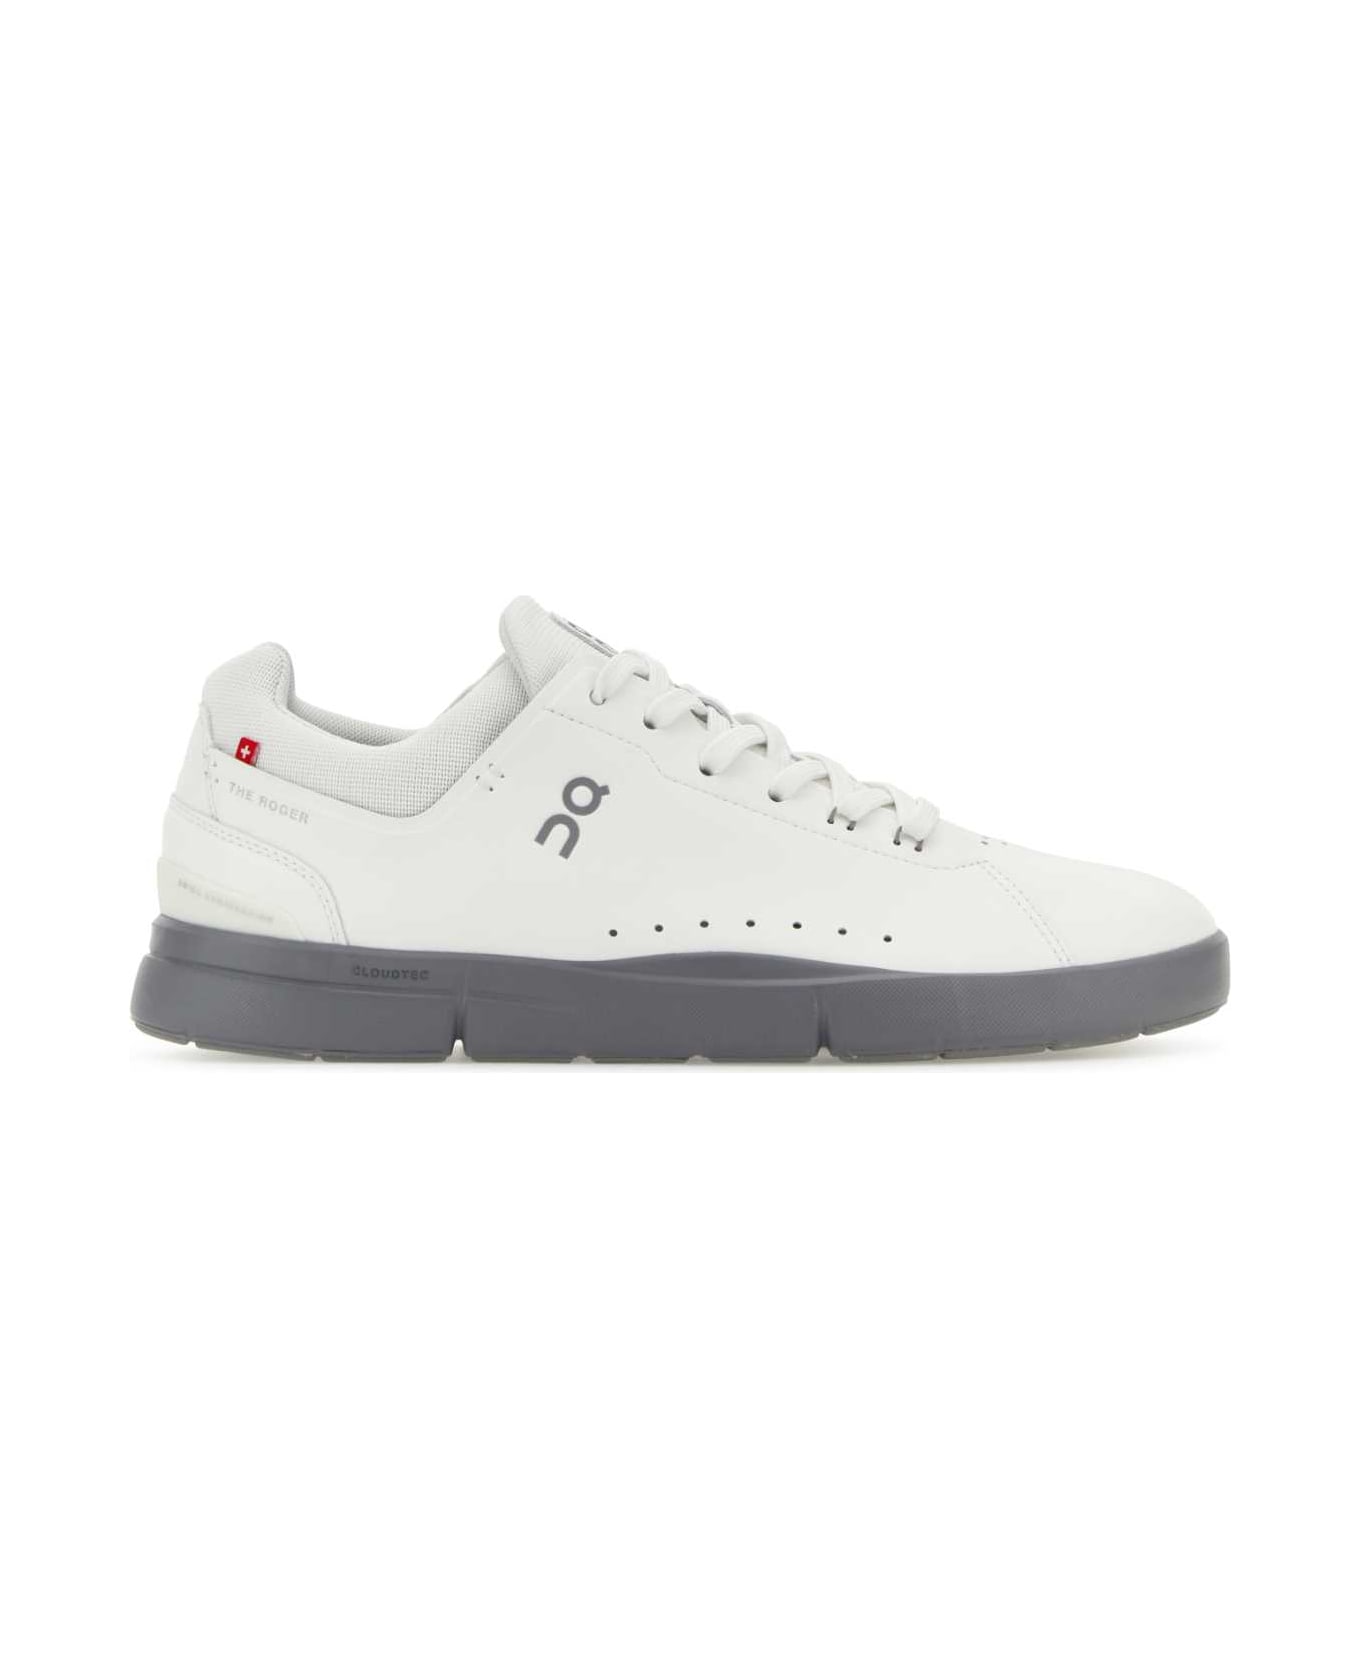 ON White Synthetic Leather And Mesh The Roger Advantage Sneakers - WHITEALLOY